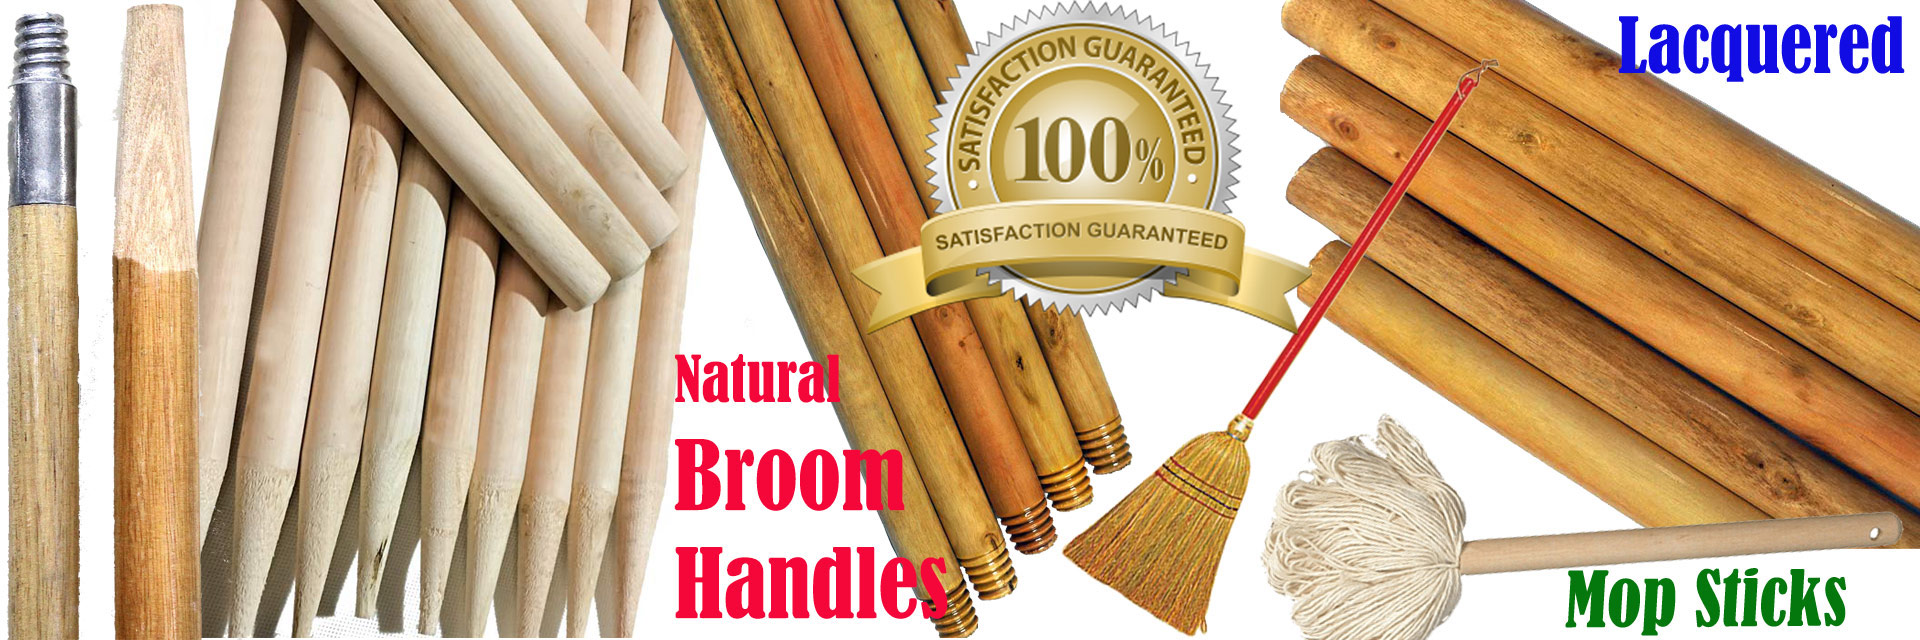 Natural sanded wooden handles factory